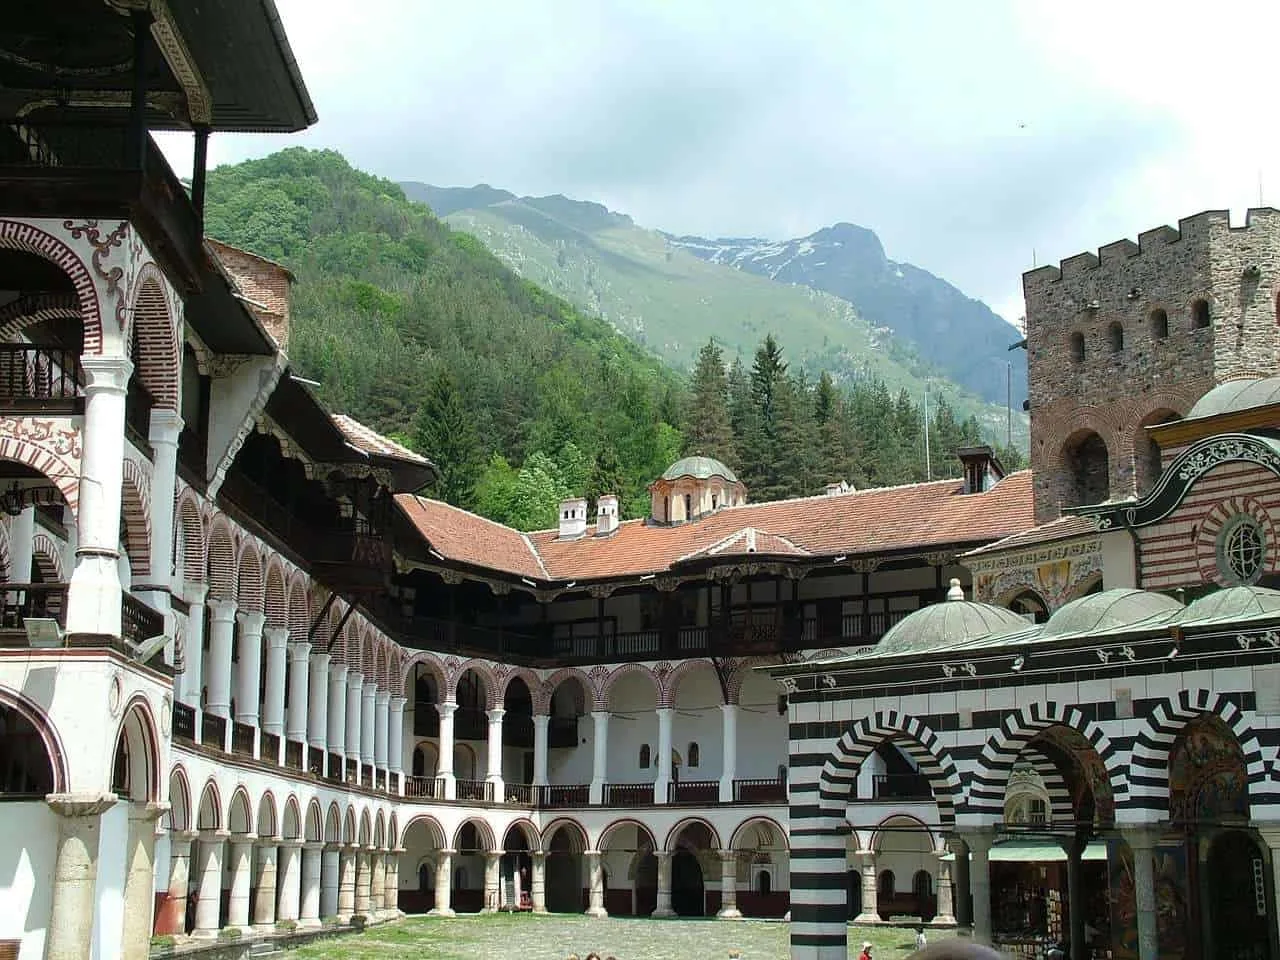 Monastery surrounded by mountains and countryside at The Rila Monastery.